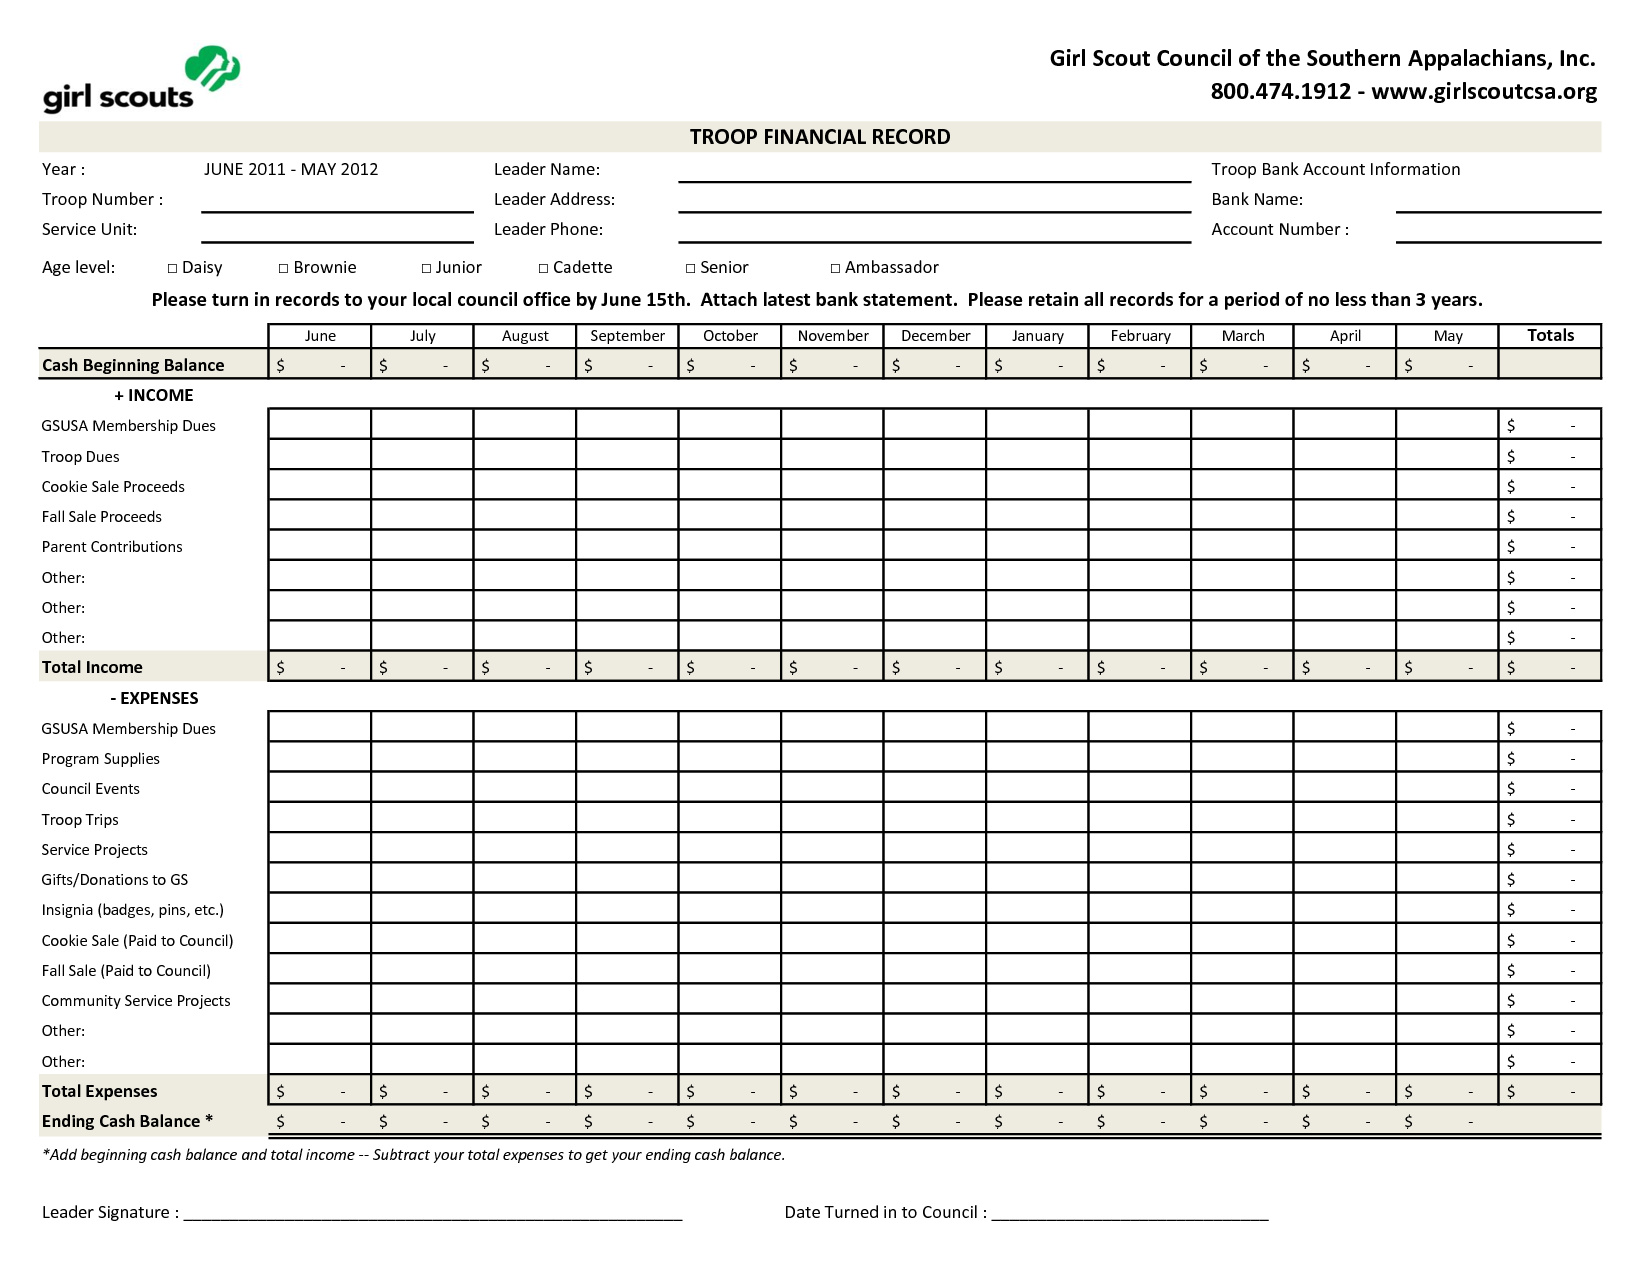 Letters Of Personal Management Merit Badge Excel Spreadsheet Intended For Personal Management Merit Badge Excel Spreadsheet Download